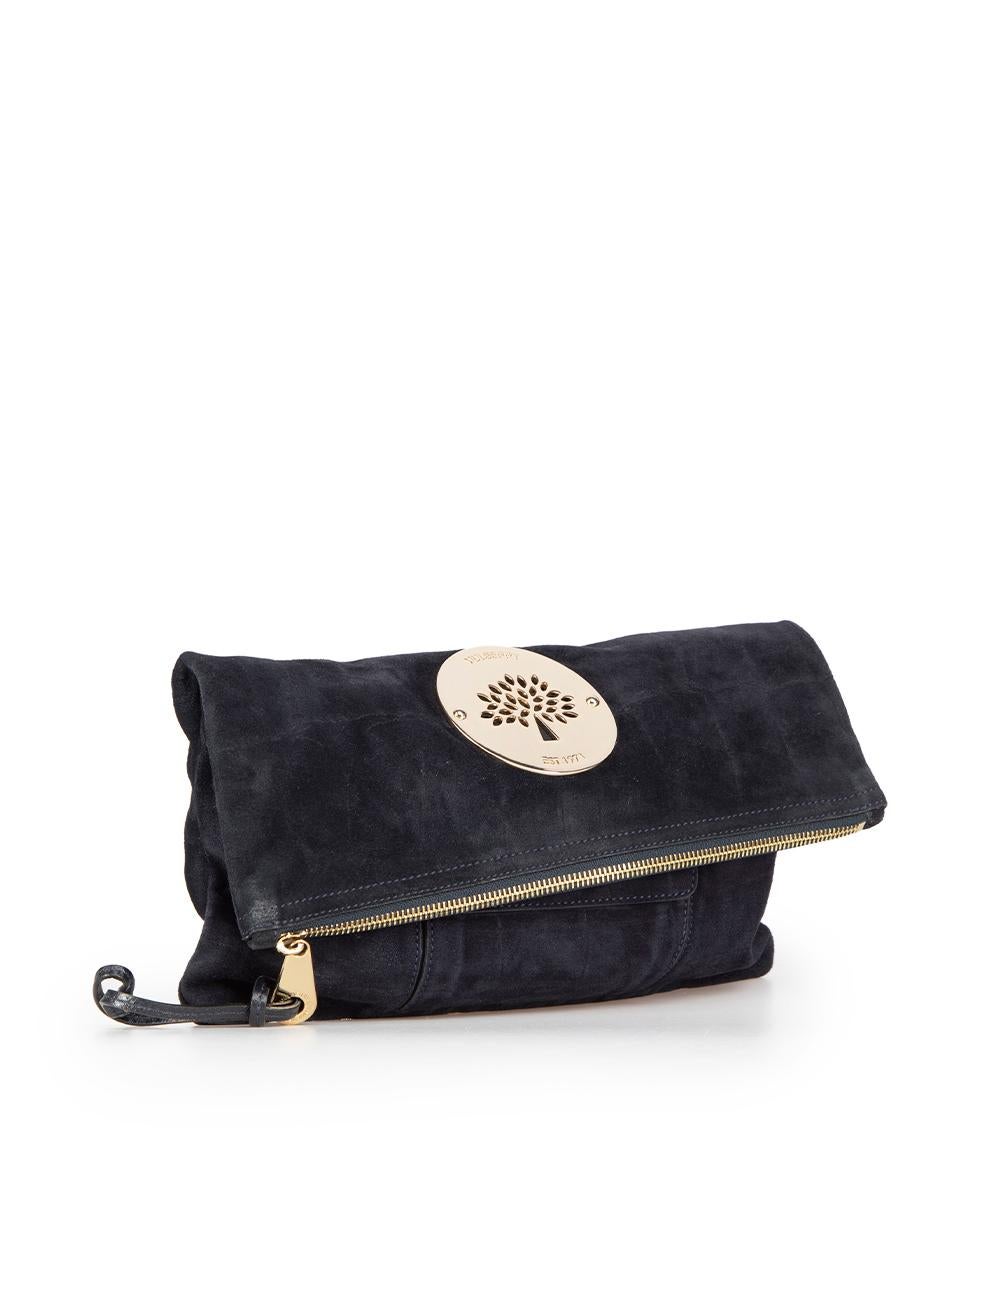 CONDITION is Very good. Minimal wear to clutch is evident. Minimal wear to back where scuffs is visible on this used Mulberry designer resale item. This item comes with a dust bag.
 
 Details
 Daria
 Navy
 Suede
 Medium clutch bag
 Croc embossed
